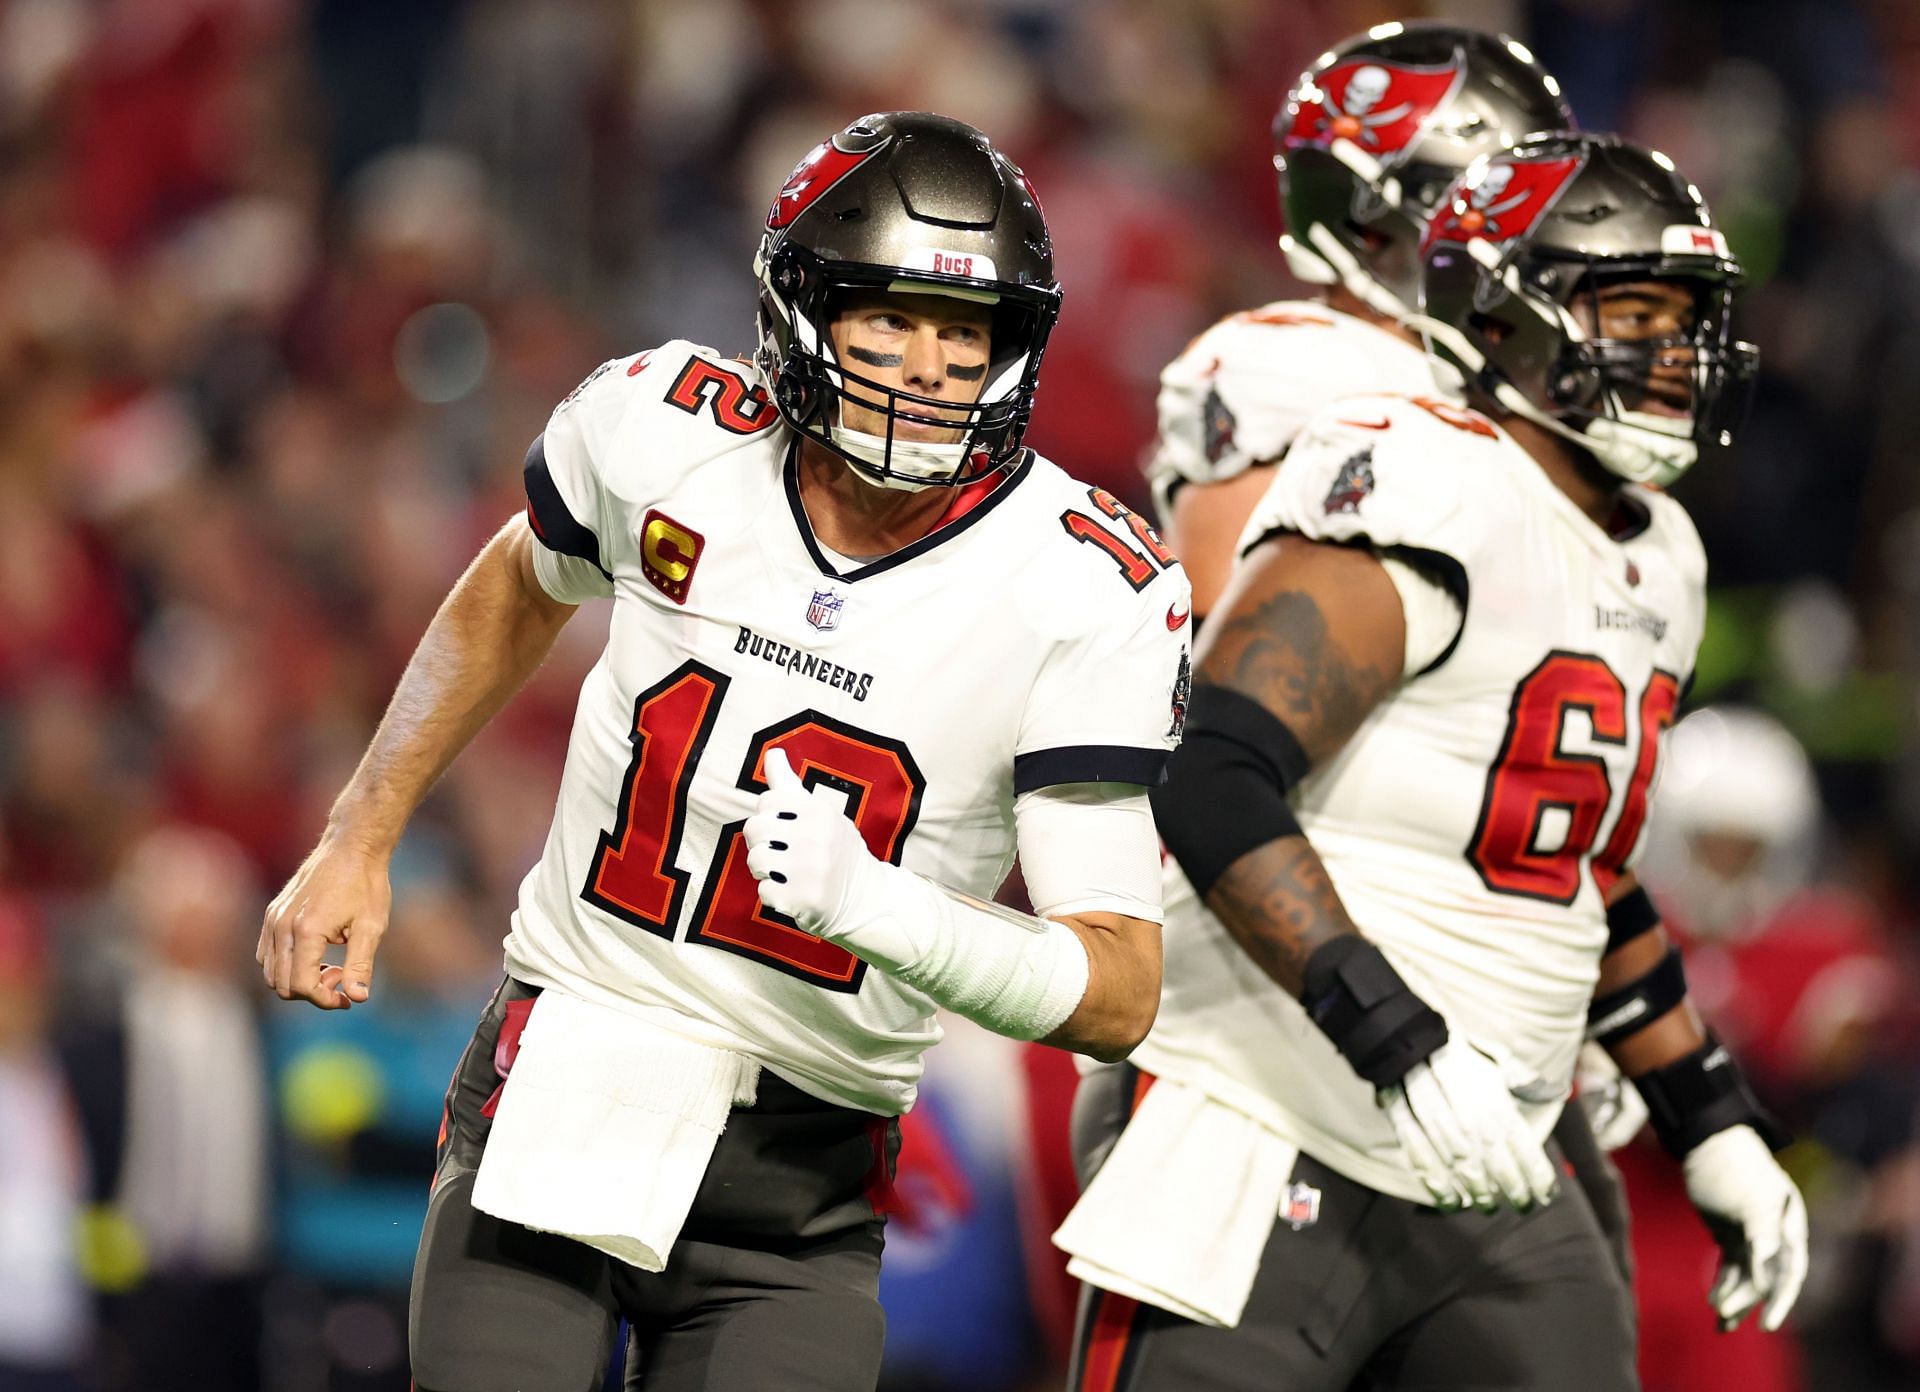 Bucs playoff picture: What seed can Buccaneers be in the 2022 NFL